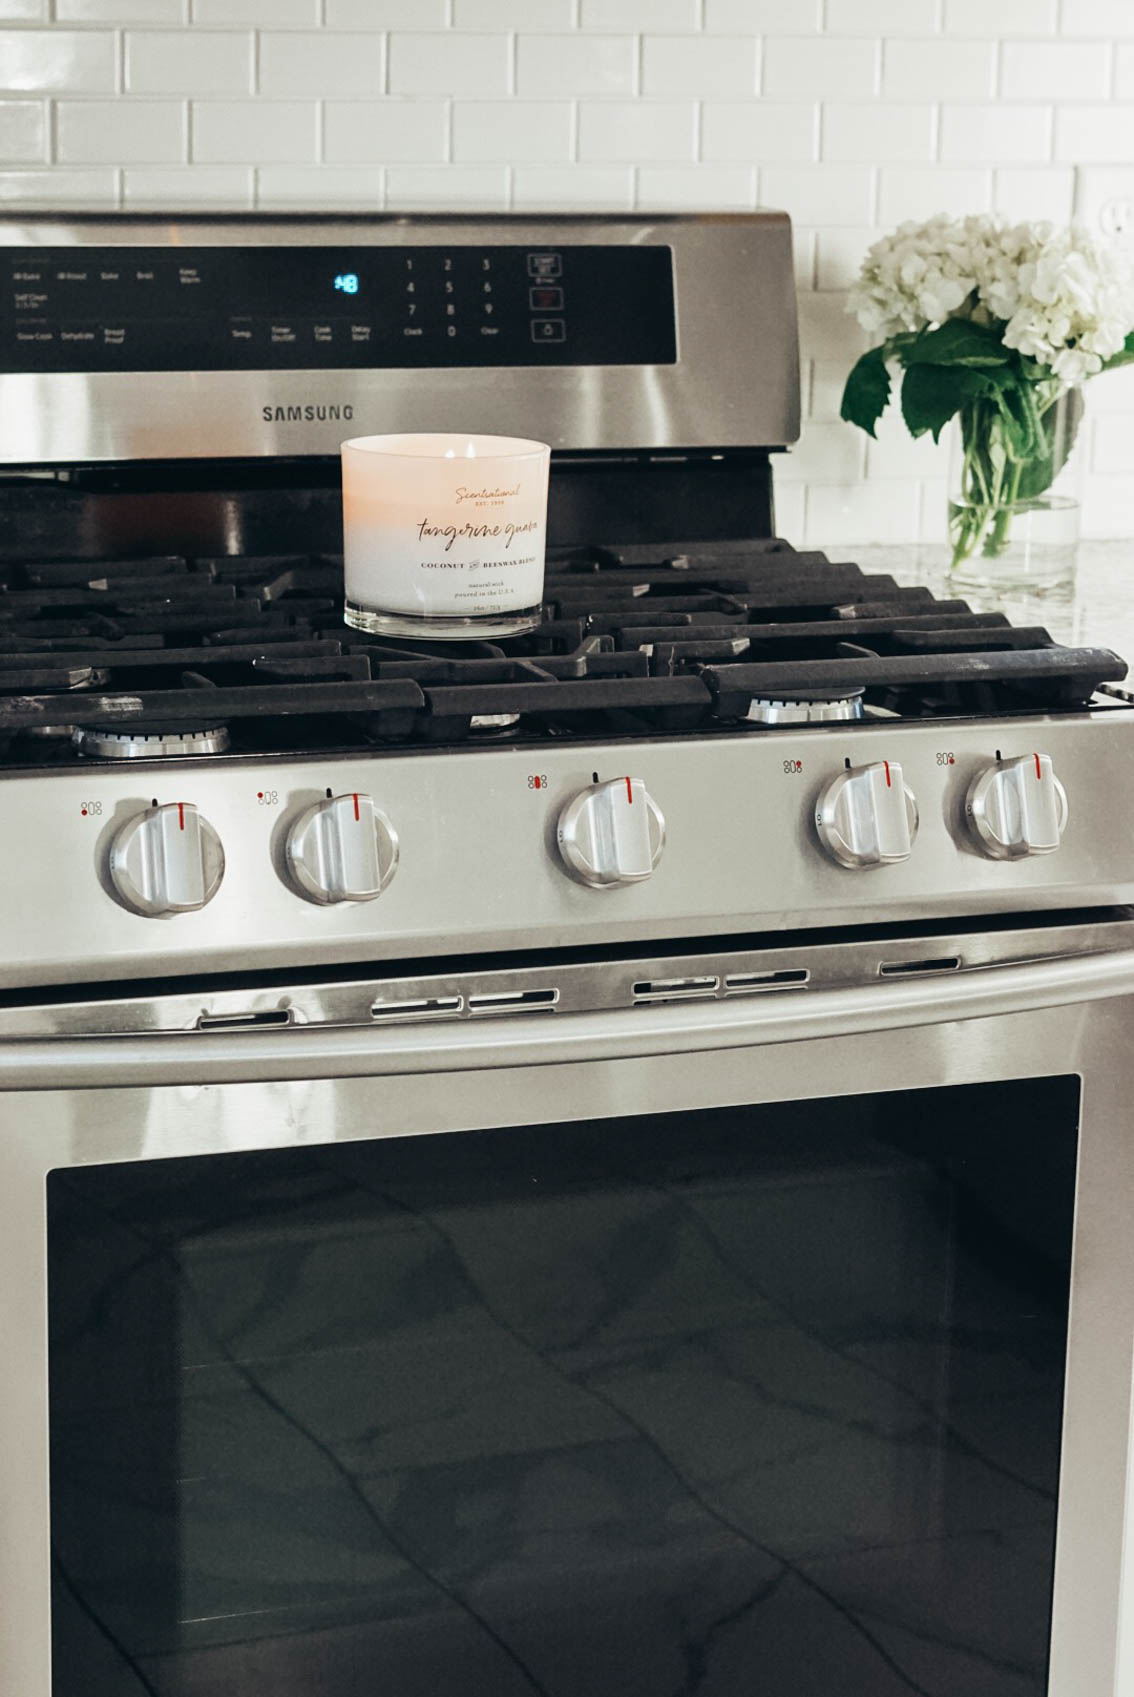 Samsung Gas Range Stainless Steel Stove Oven